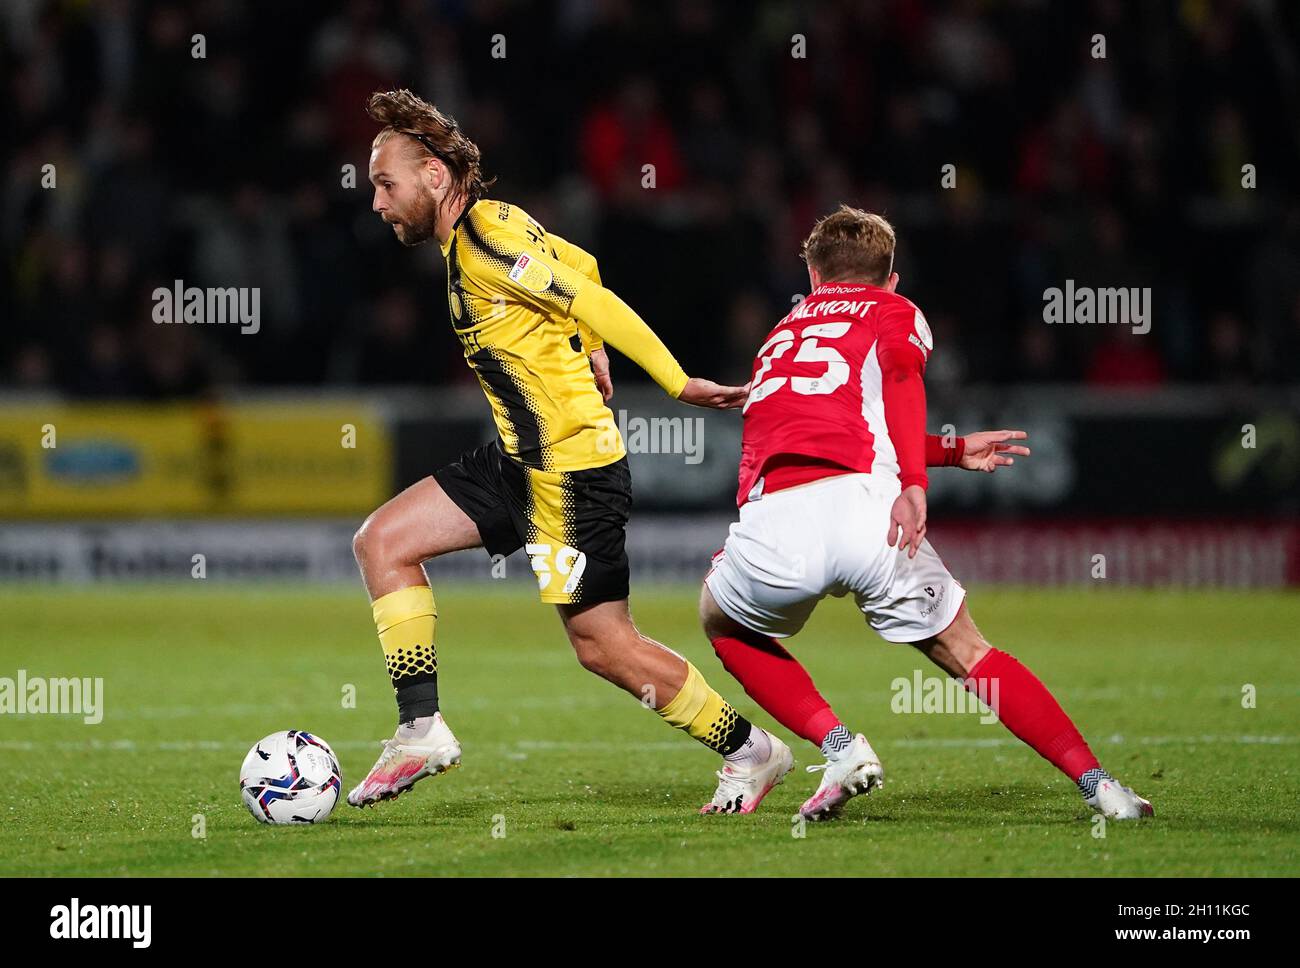 Burton Albion's Harry Chapman (left) and Morecambe's Alfie McCalmont battle for the ball during the Sky Bet League One match at the Pirelli Stadium, Burton upon Trent. Picture date: Friday October 15, 2021. Stock Photo